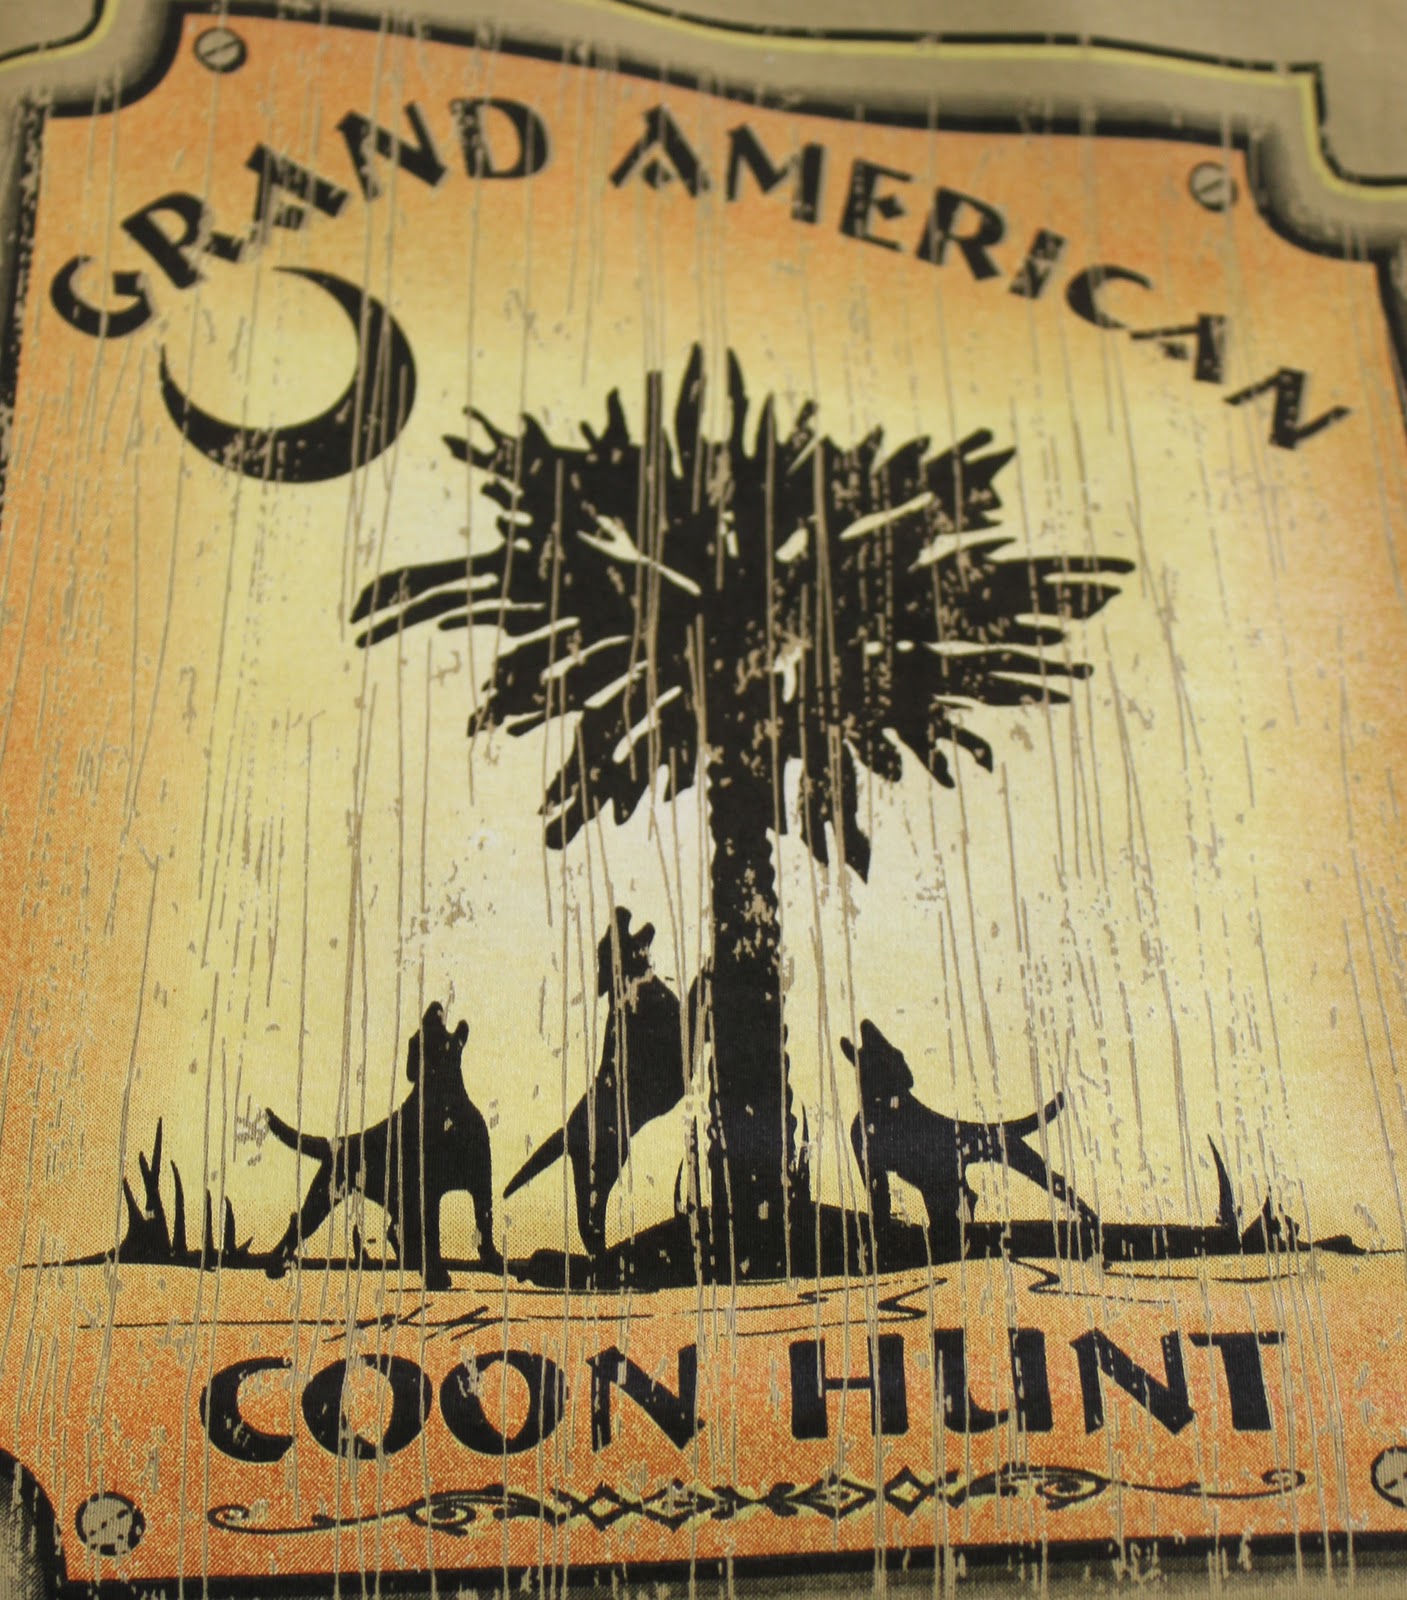 Coon Hunting Logos Great Independent Logo For The